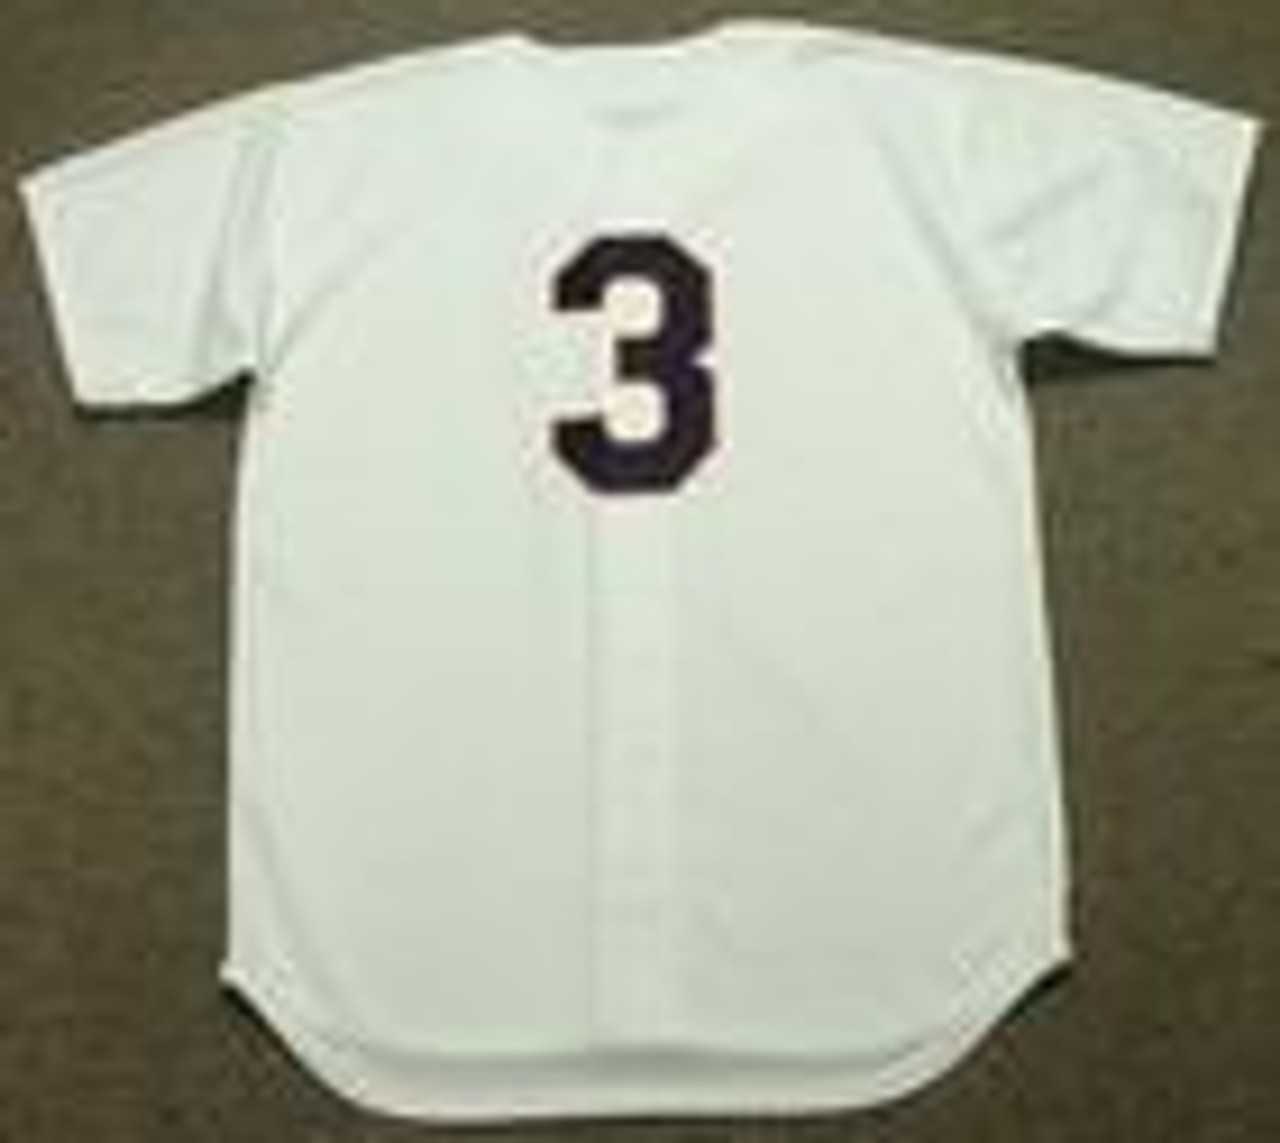 Barry Bonds Jersey - Pittsburgh Pirates Home Cooperstown Throwback